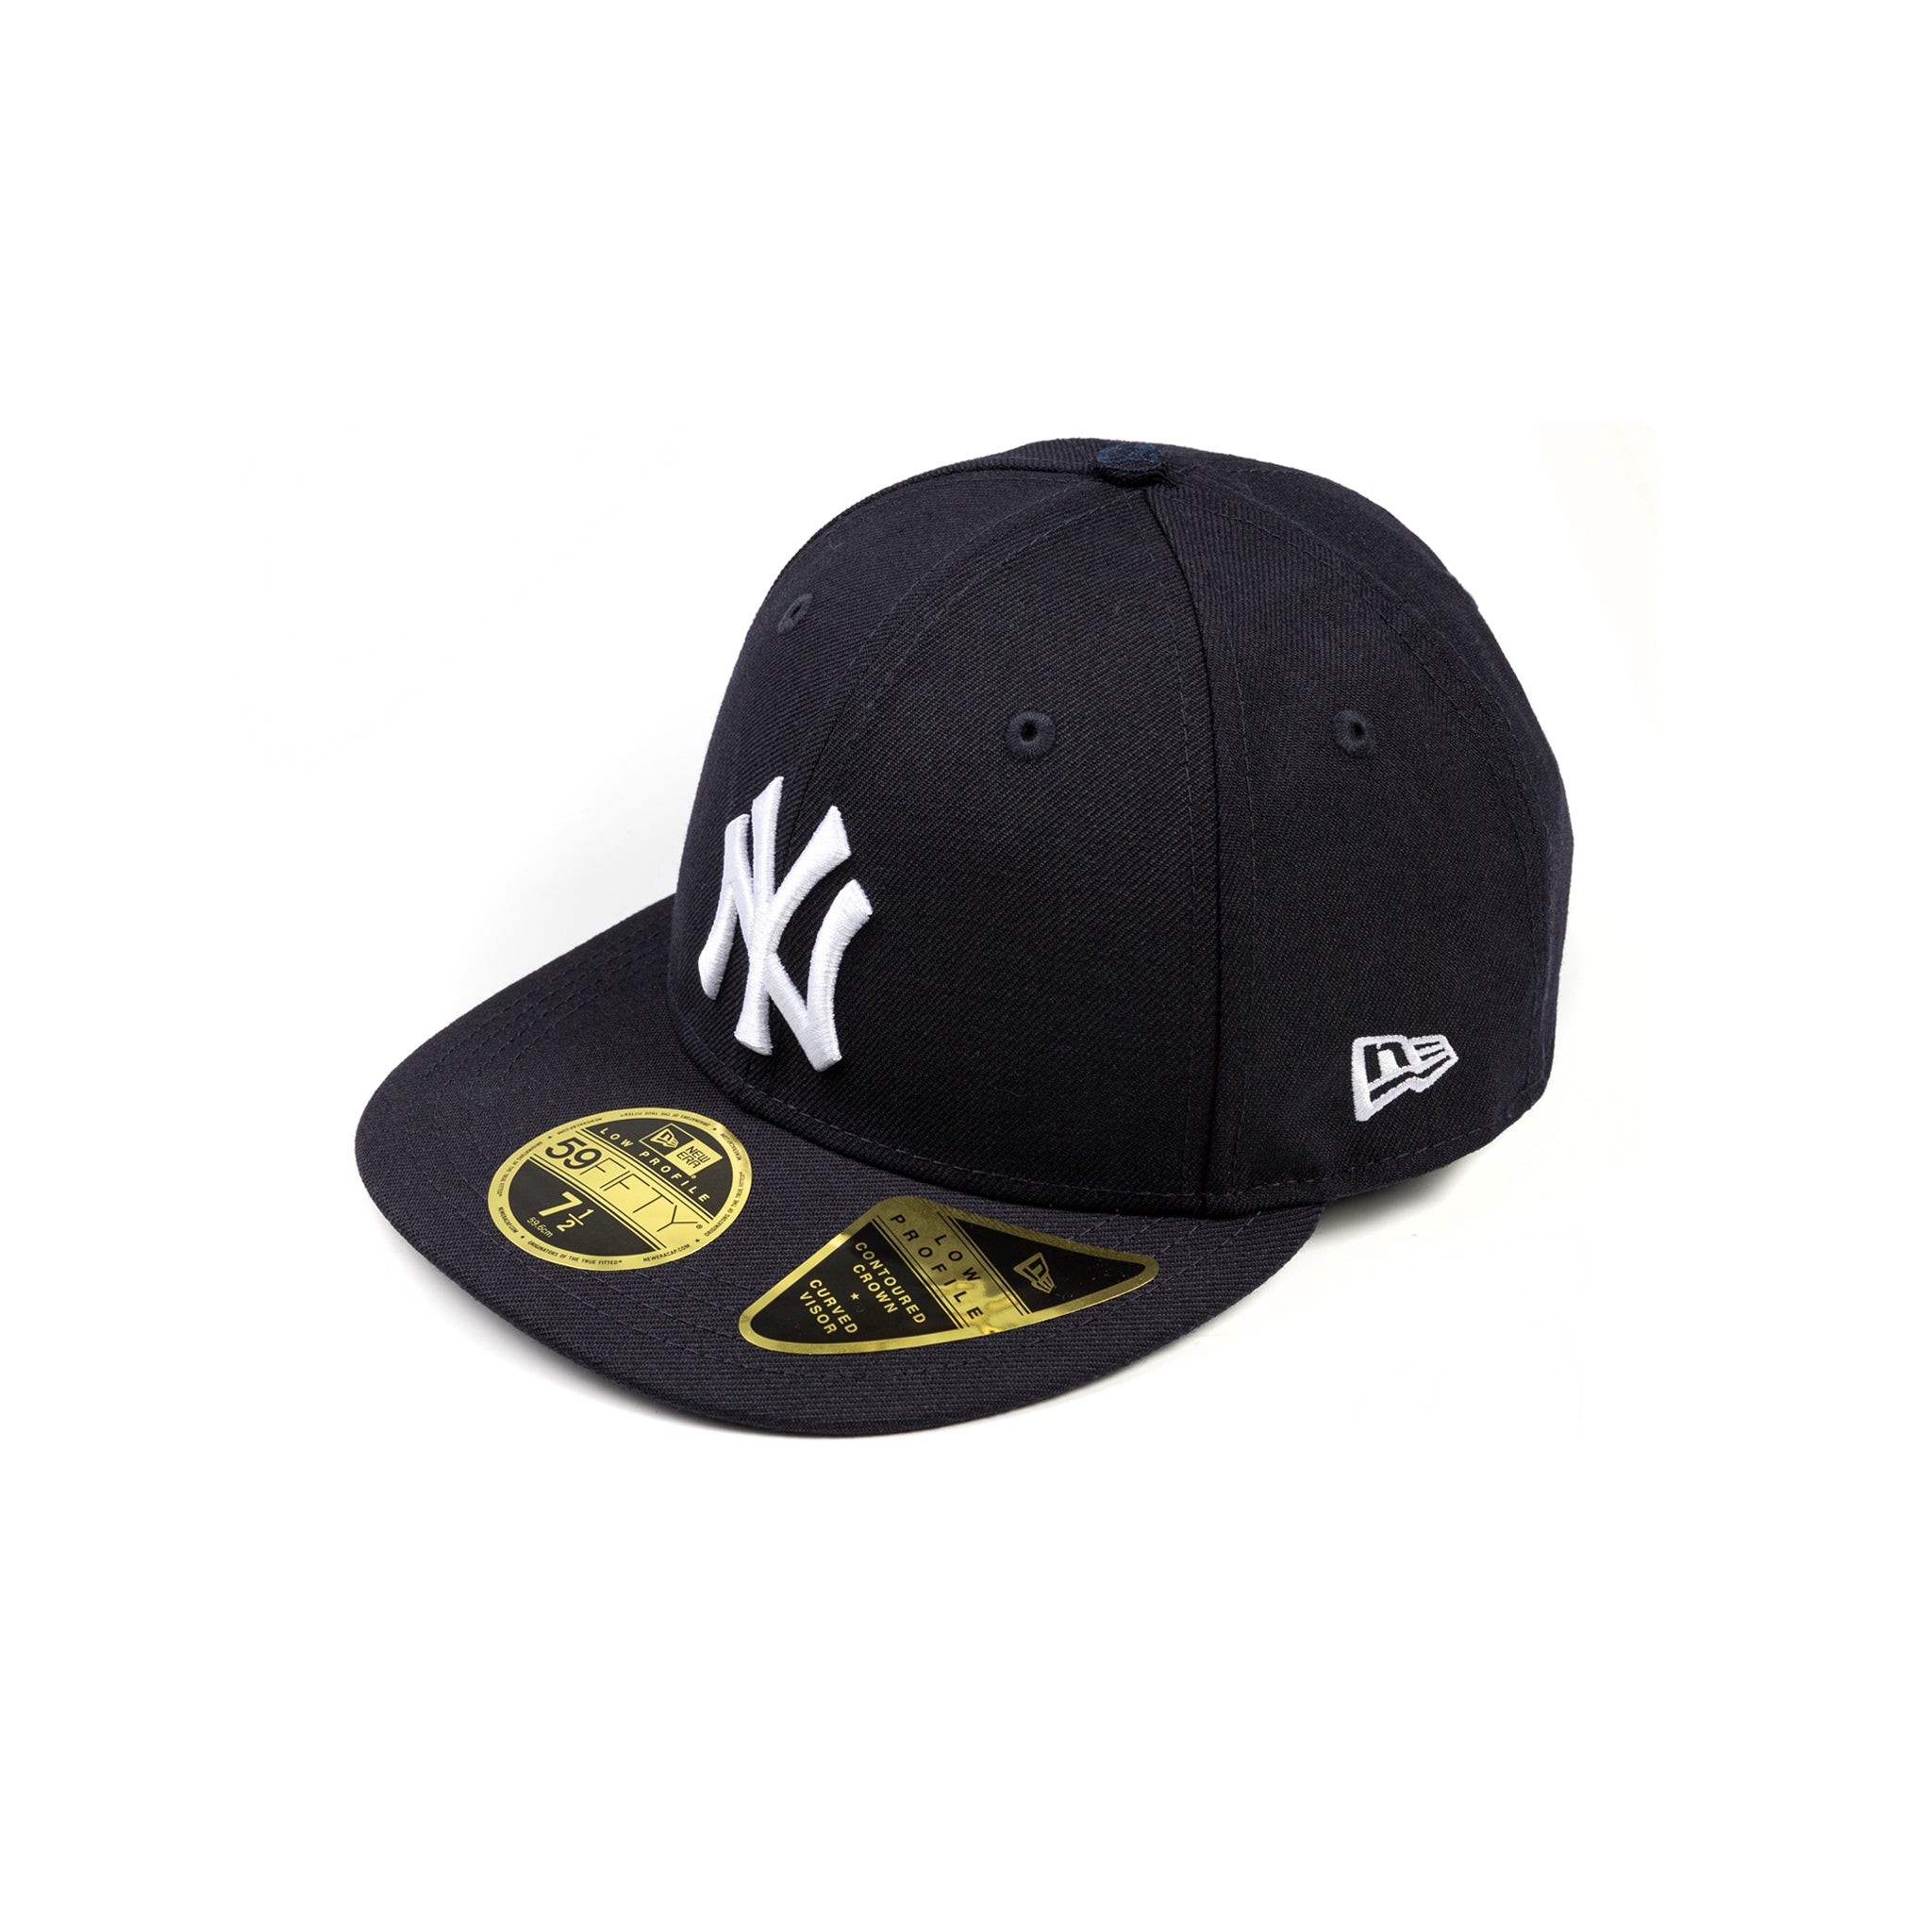 BBC X NEW YORK YANKEES LOGO FITTED HAT - NAVY